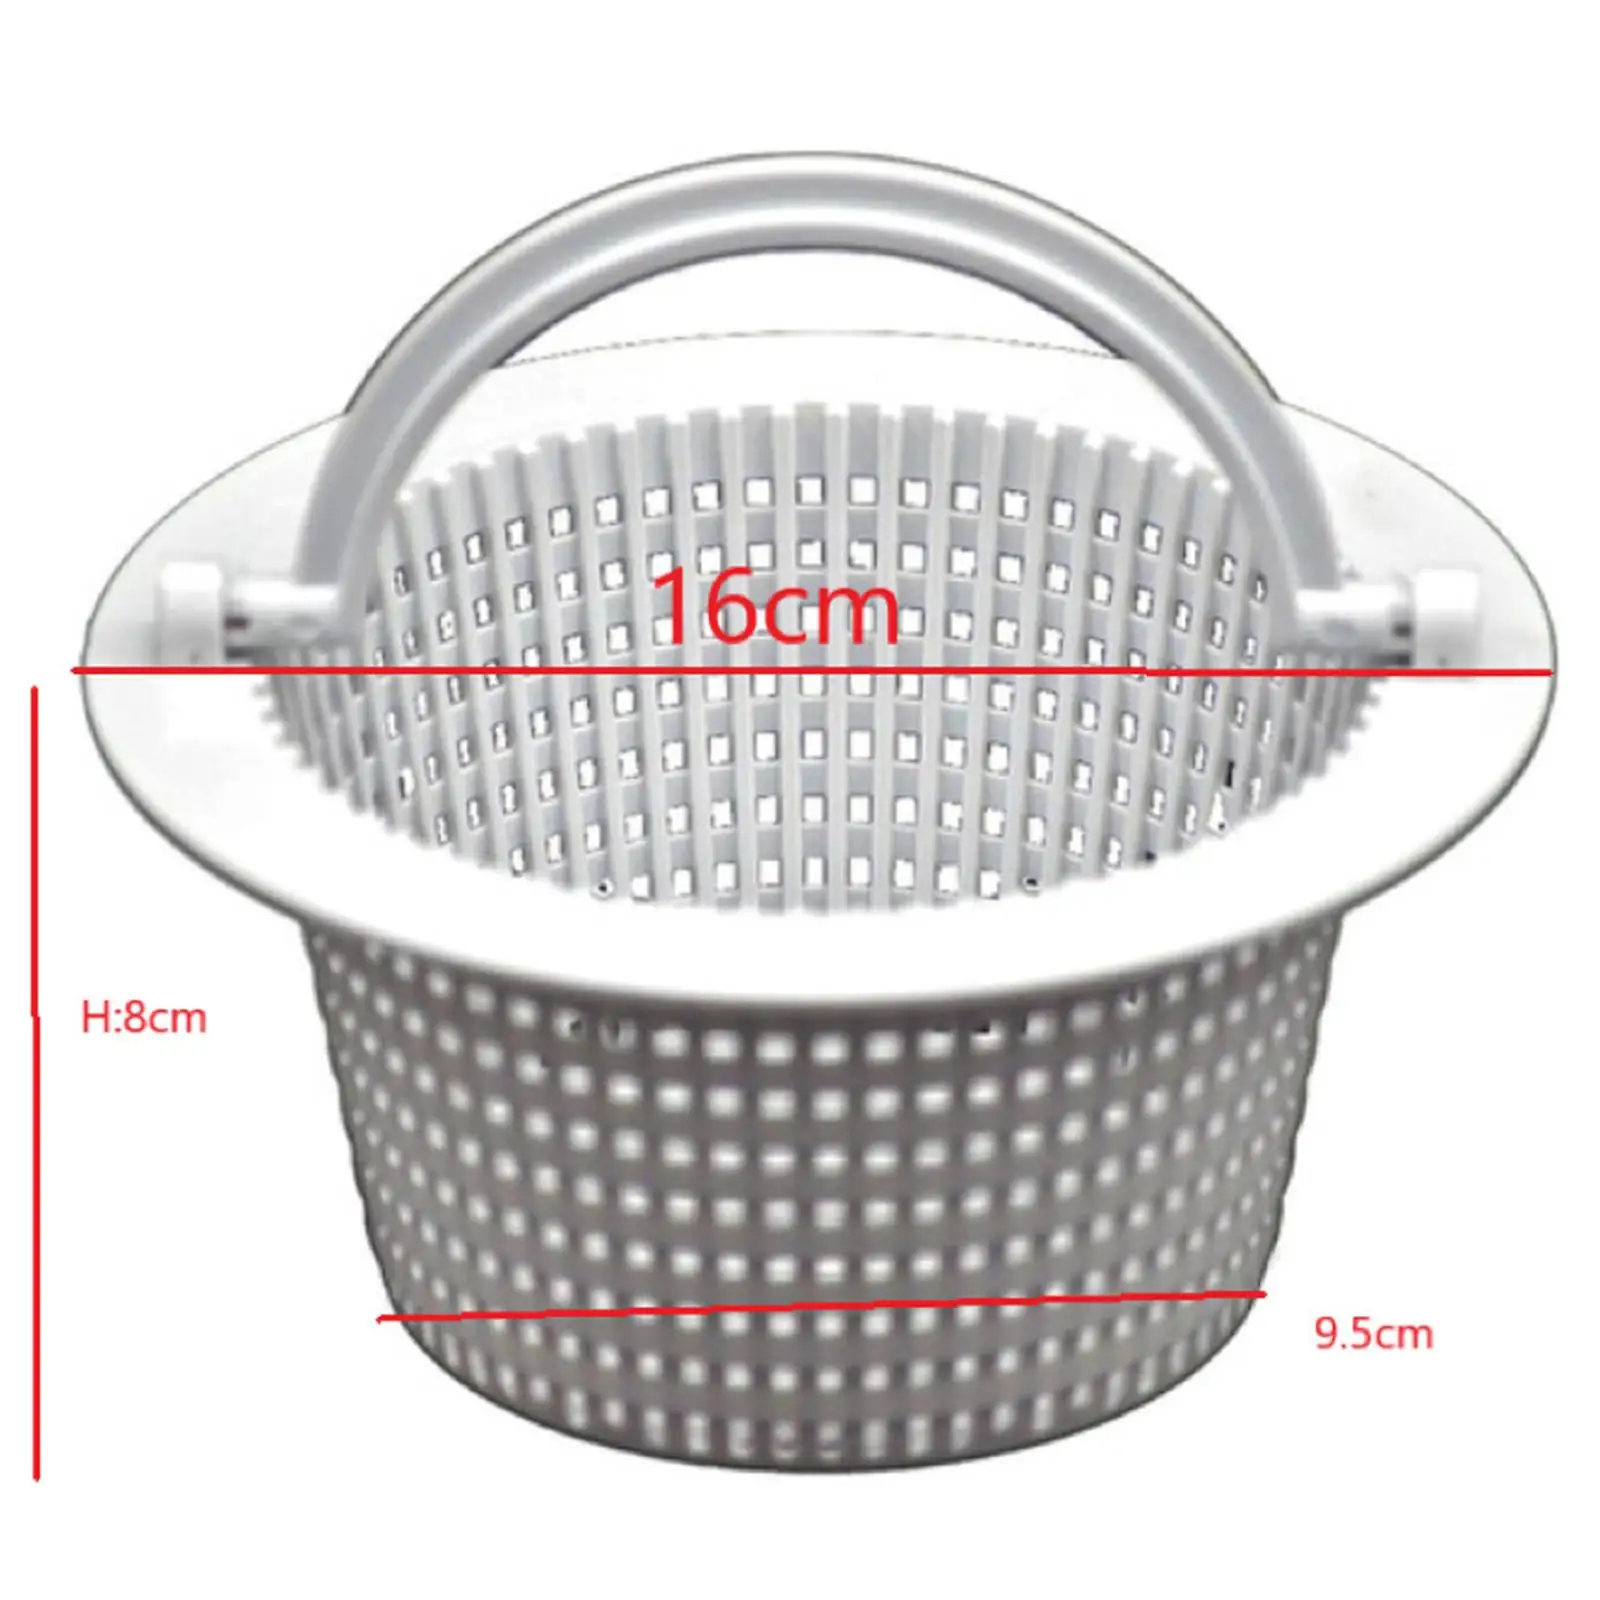 Pool Strainer Basket Cleaning Tool with Handle Effective Skimmer Basket for Cleaning Scum